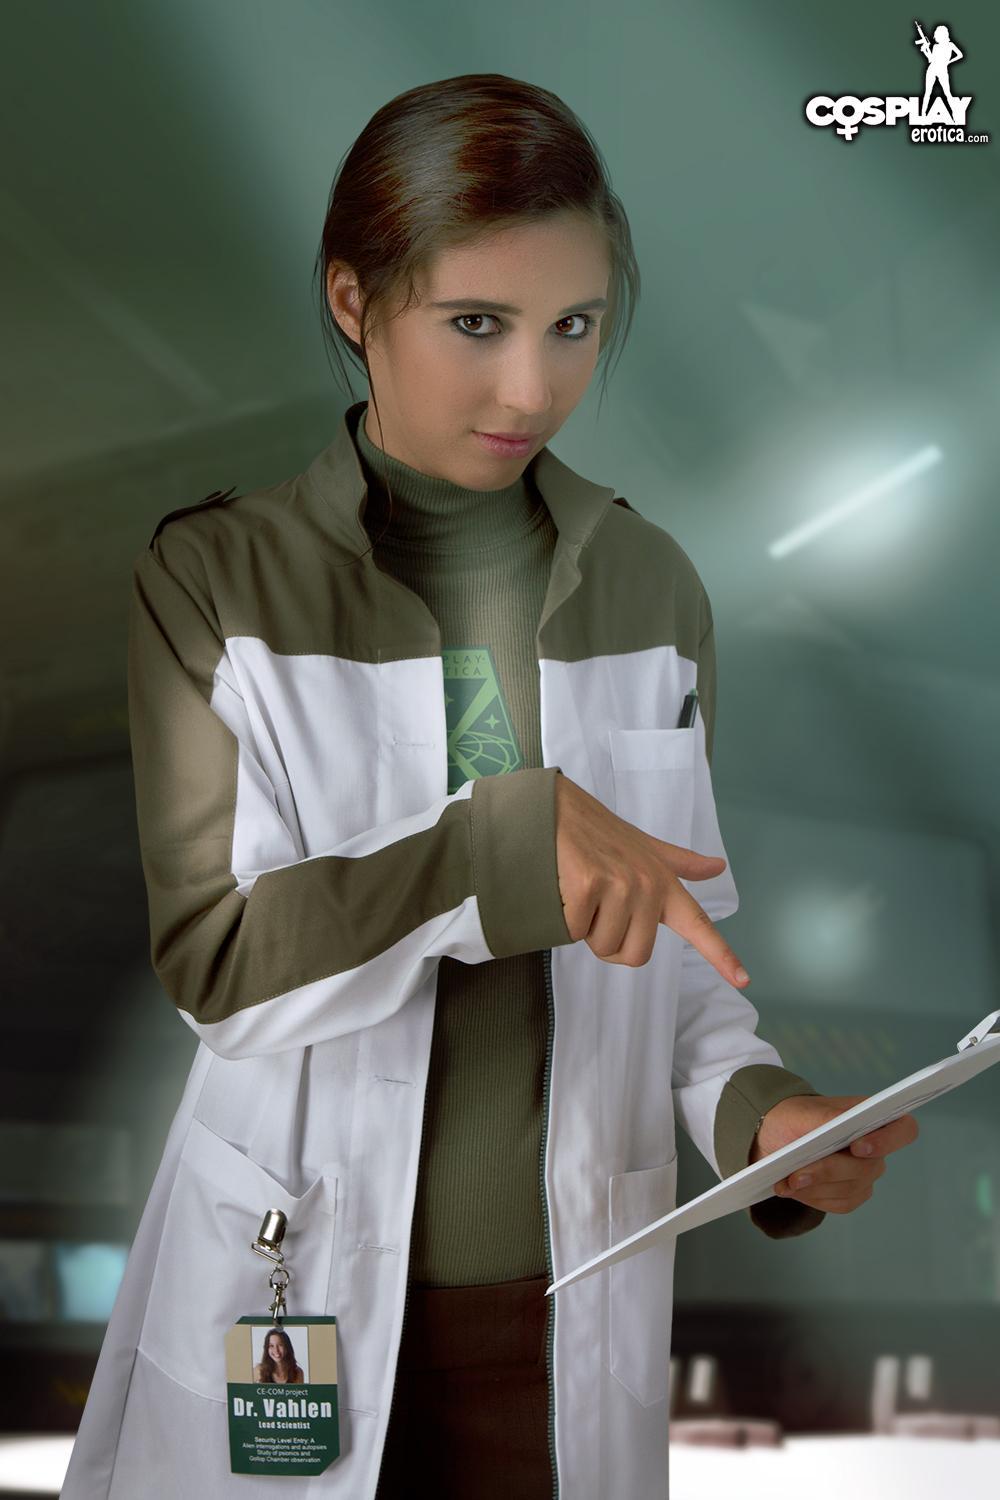 Beautiful cosplayer Stacy dresses up as Dr. Vahlen from X-Com #60007905